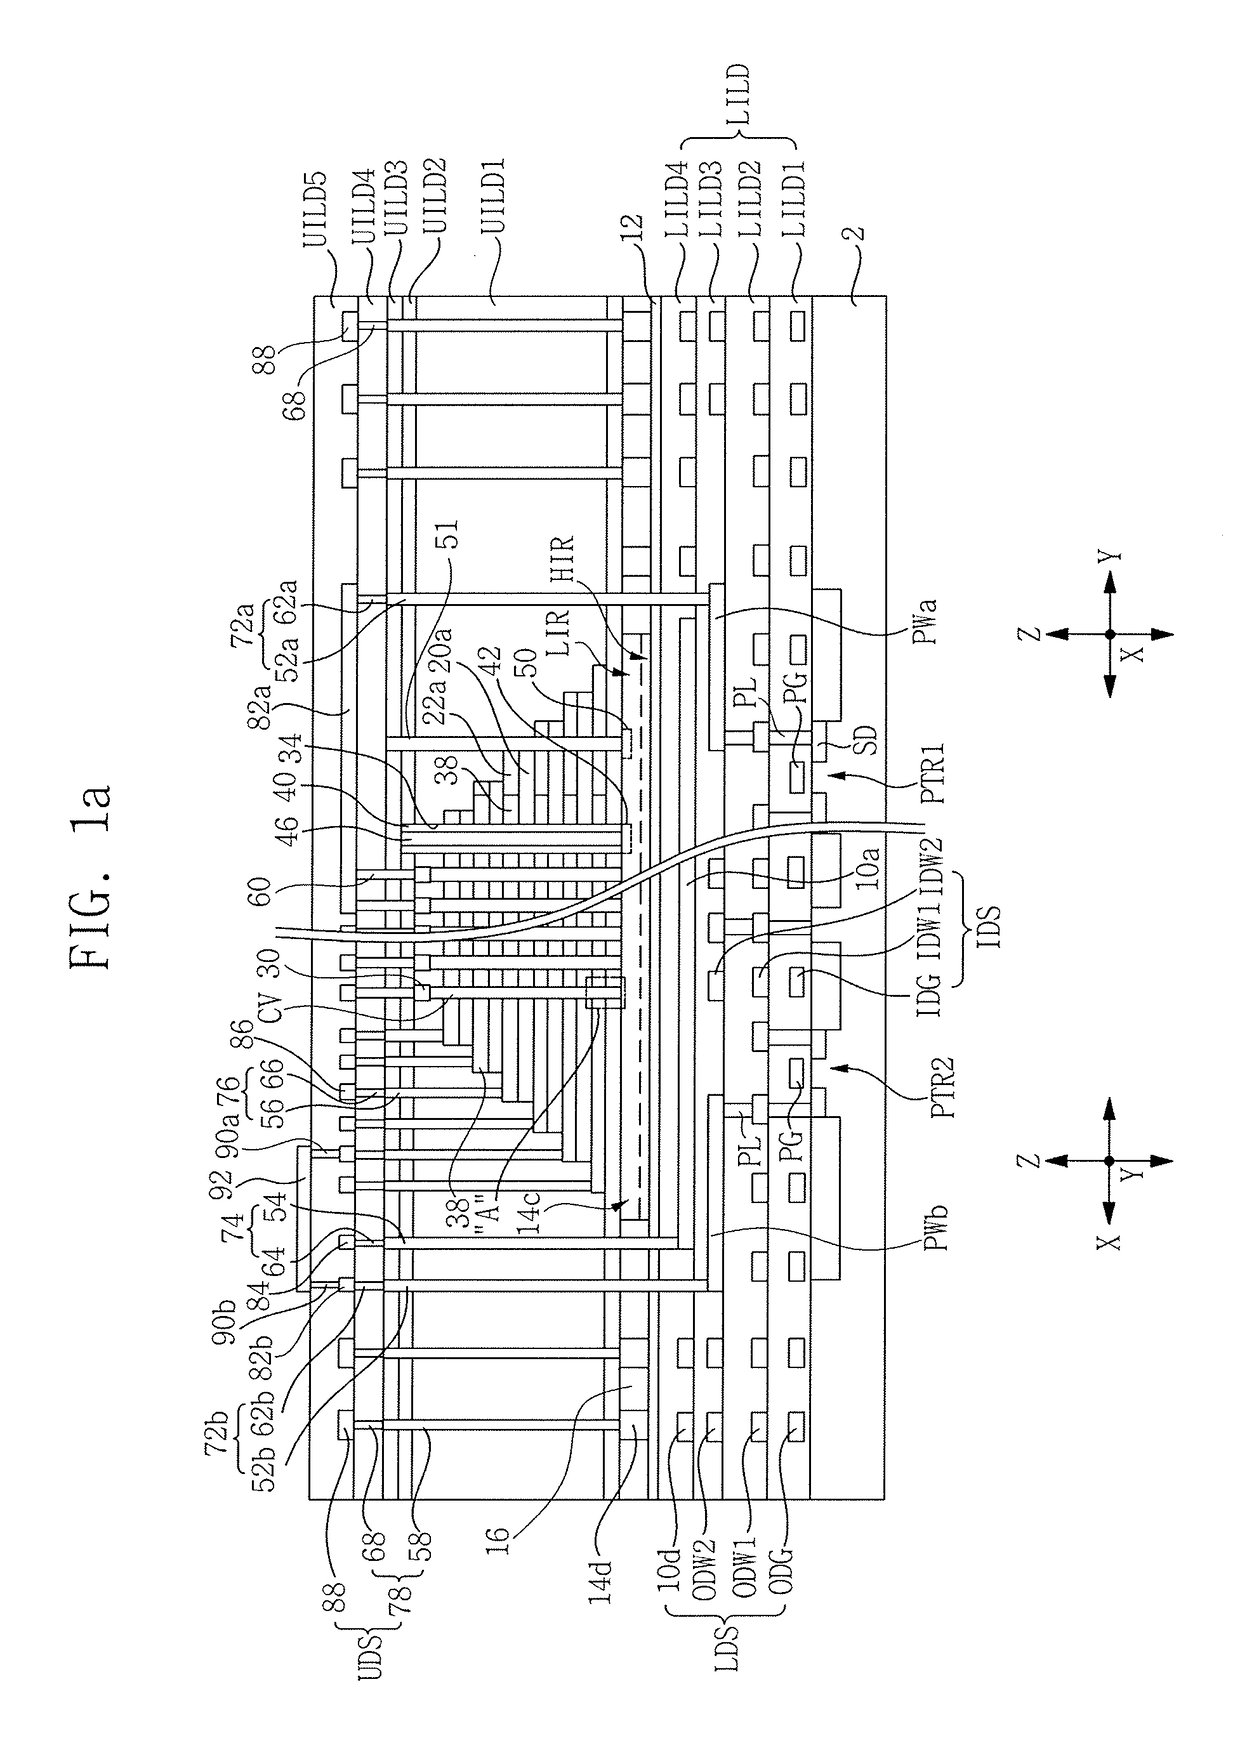 Semiconductor device with an interconnection structure having interconnections with an interconnection density that decreases moving away from a cell semiconductor pattern